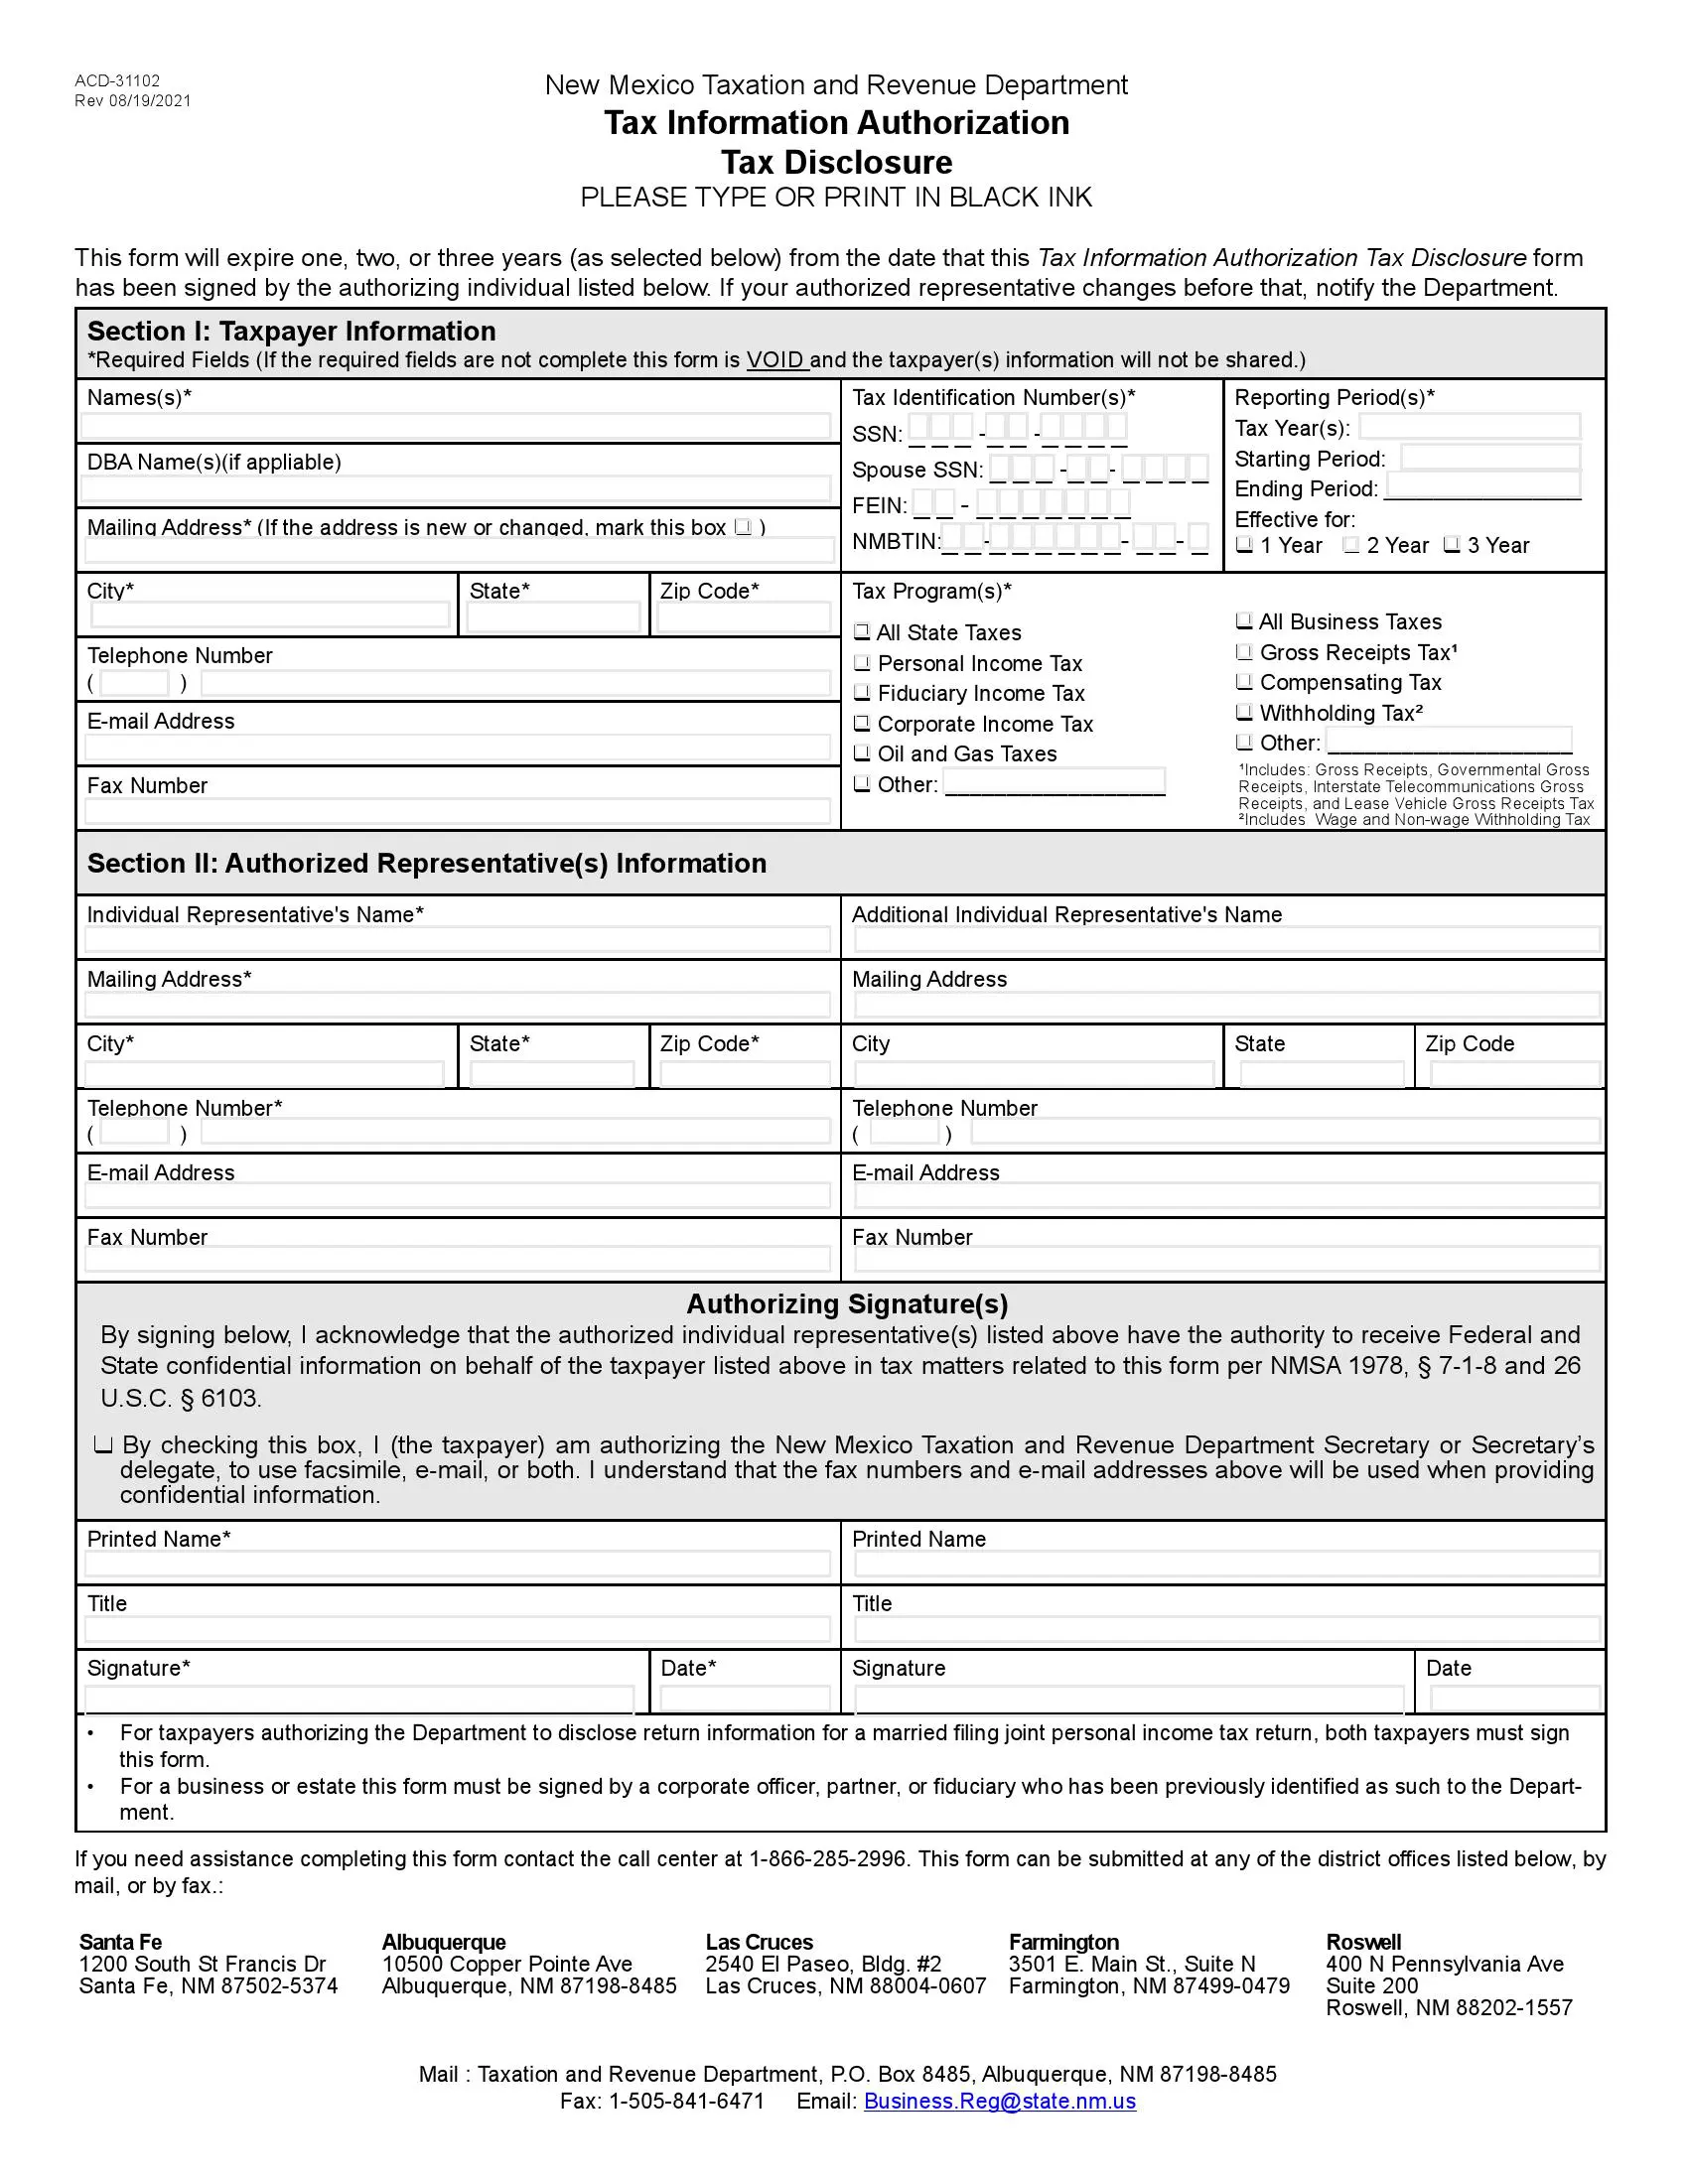 New Mexico form acd 31102 preview